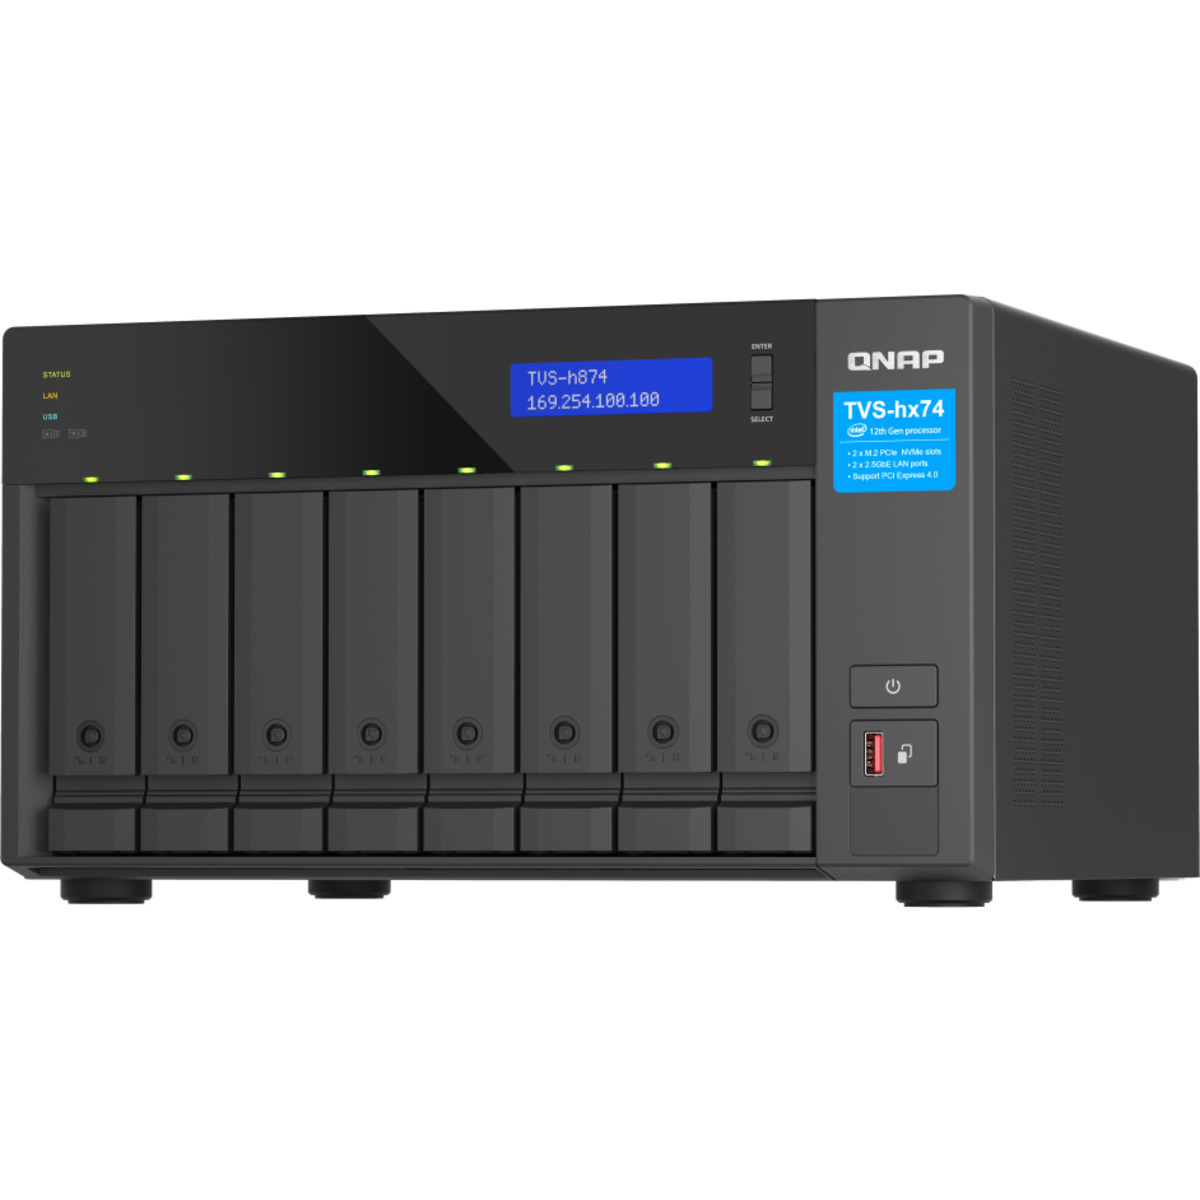 QNAP TVS-h874 Core i7 7tb 8-Bay Desktop Multimedia / Power User / Business NAS - Network Attached Storage Device 7x1tb Samsung 870 EVO MZ-77E1T0BAM 2.5 560/530MB/s SATA 6Gb/s SSD CONSUMER Class Drives Installed - Burn-In Tested TVS-h874 Core i7